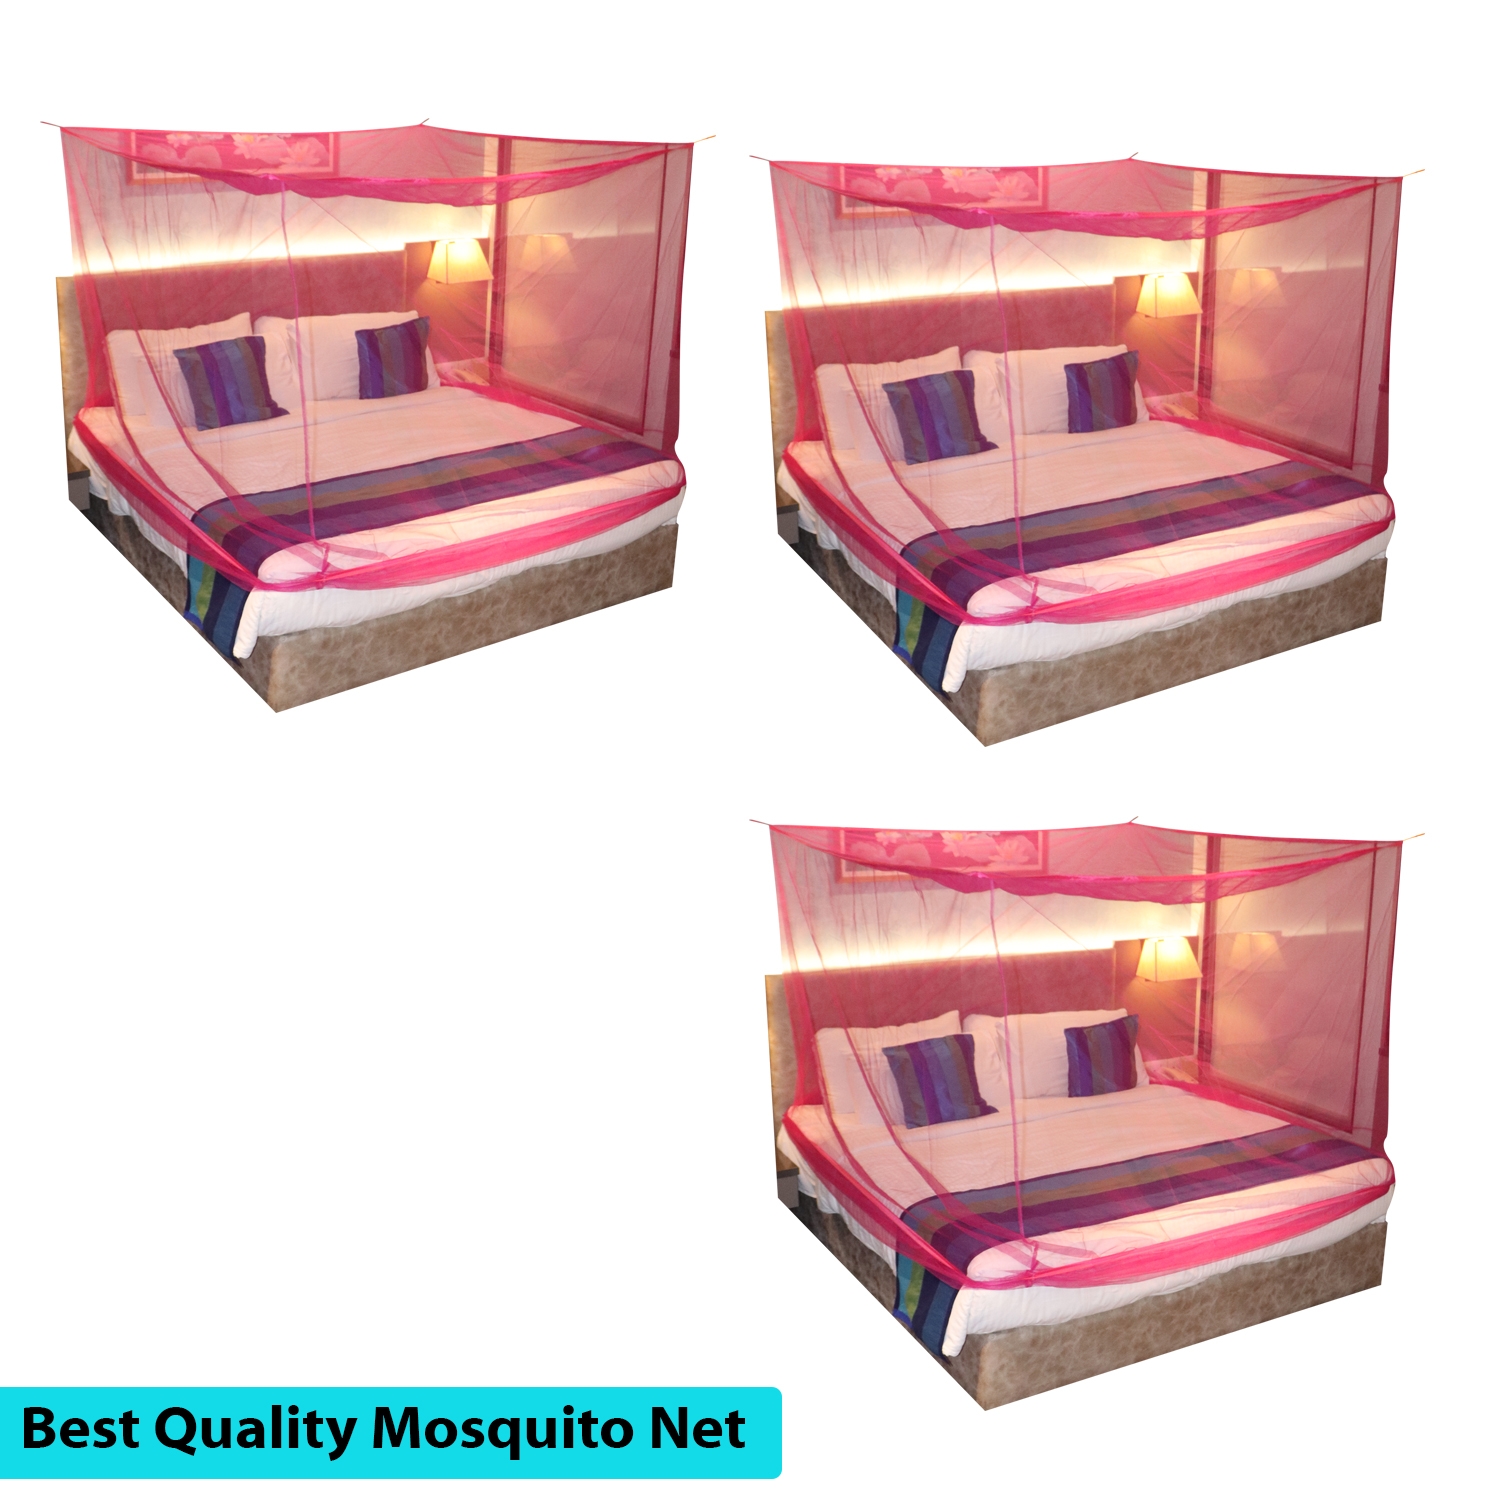 Paola Jewels | Mosquito Net for Double Bed, King-Size, Square Hanging Foldable Polyester Net Pink Pack of 3 0